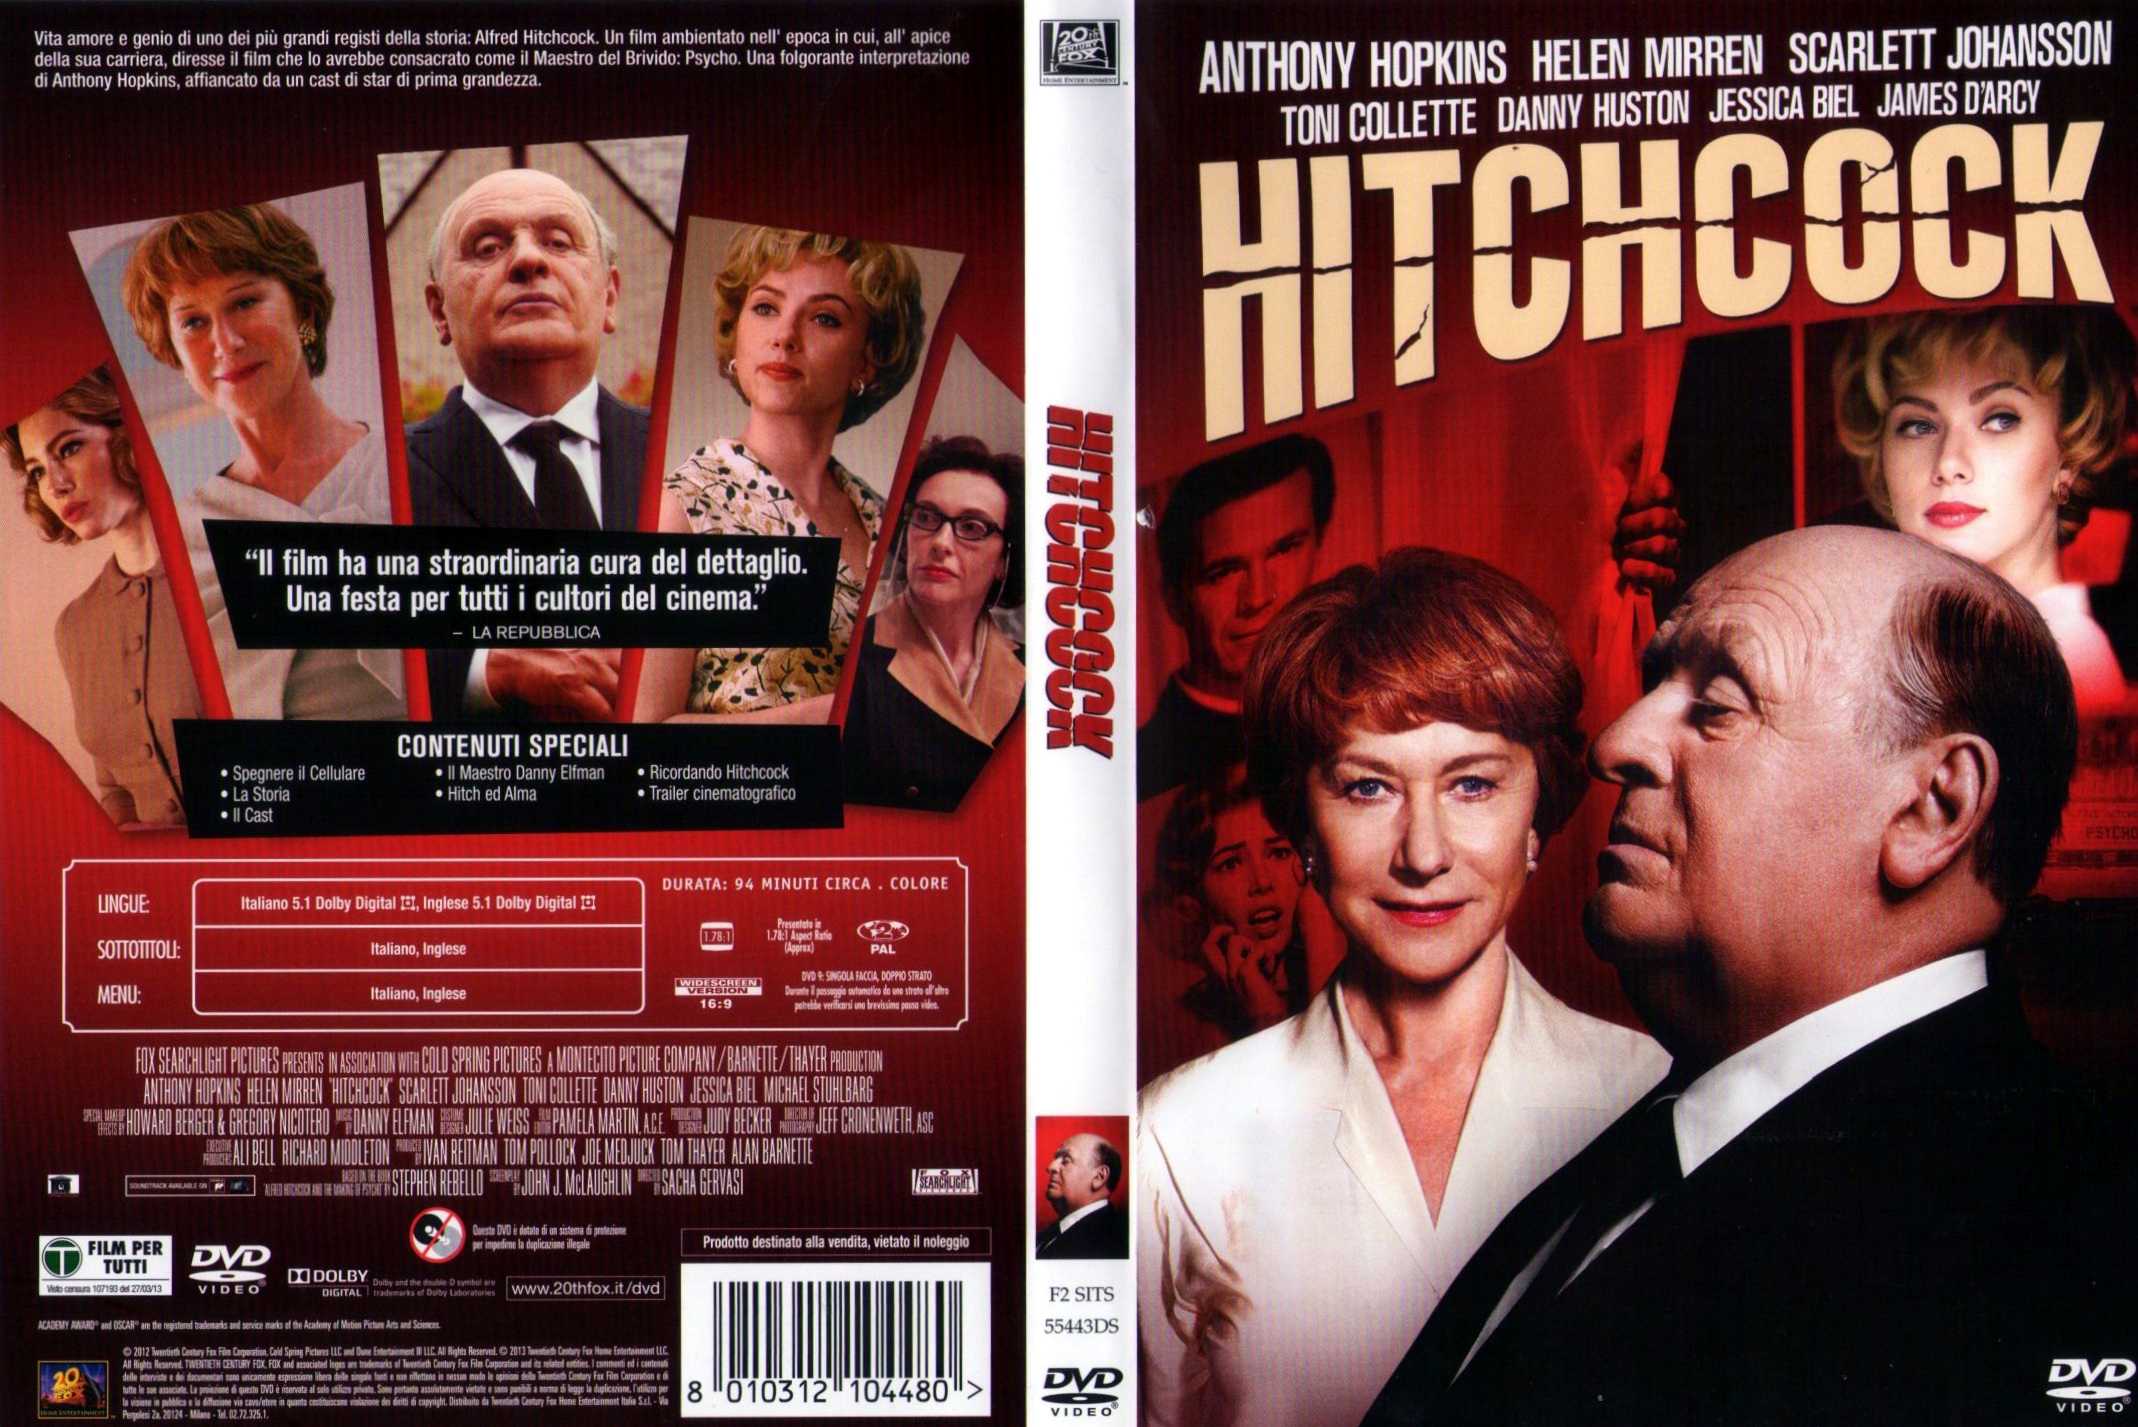 COVERS.BOX.SK ::: Hitchcock (2012) - high quality DVD / Blueray / Movie